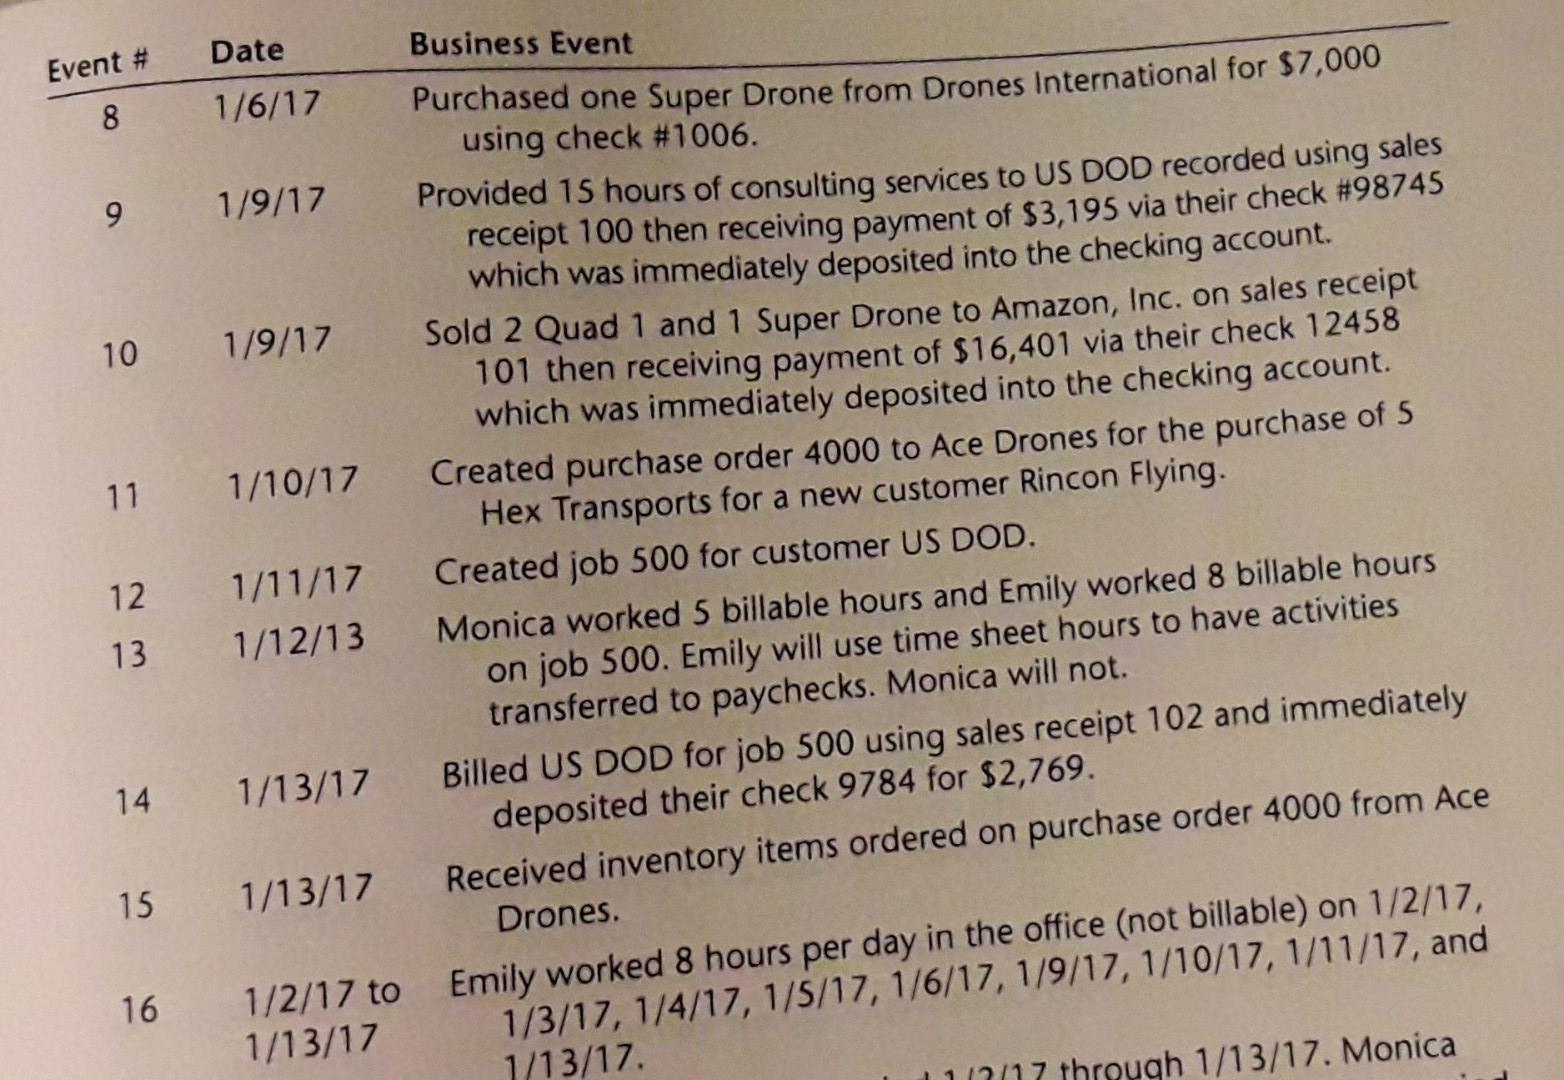 Business EventEvent #Date8 1/6/17 Purchased one Super Drone from Drones International for $7,000using check #1006.9 1/9/